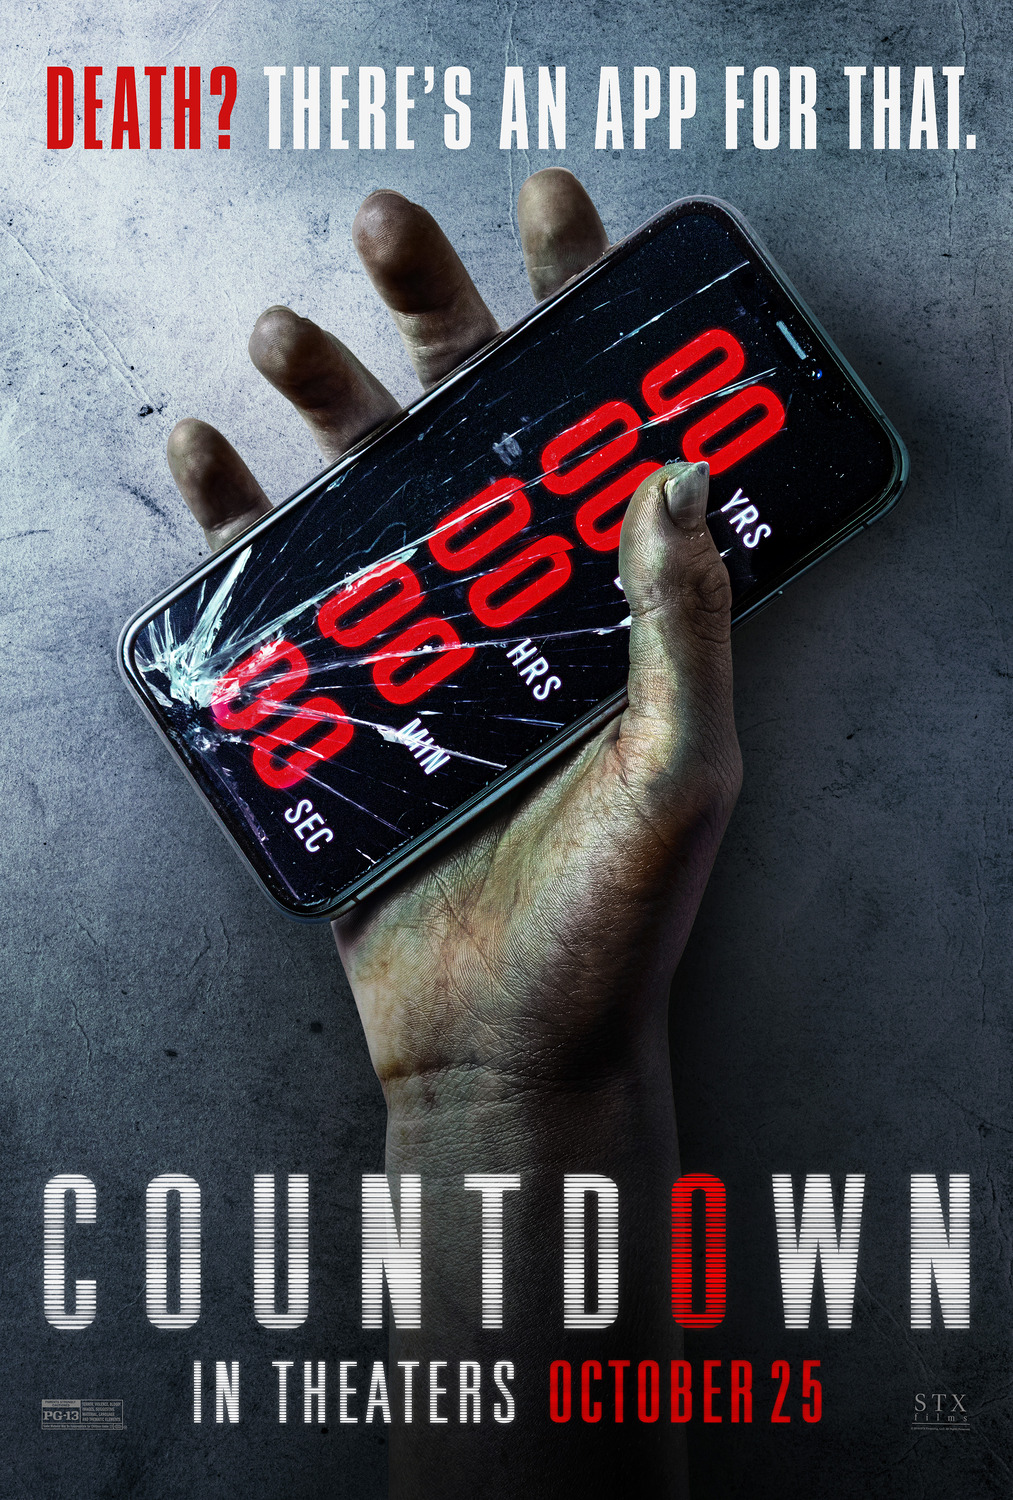 Extra Large Movie Poster Image for Countdown (#2 of 3)